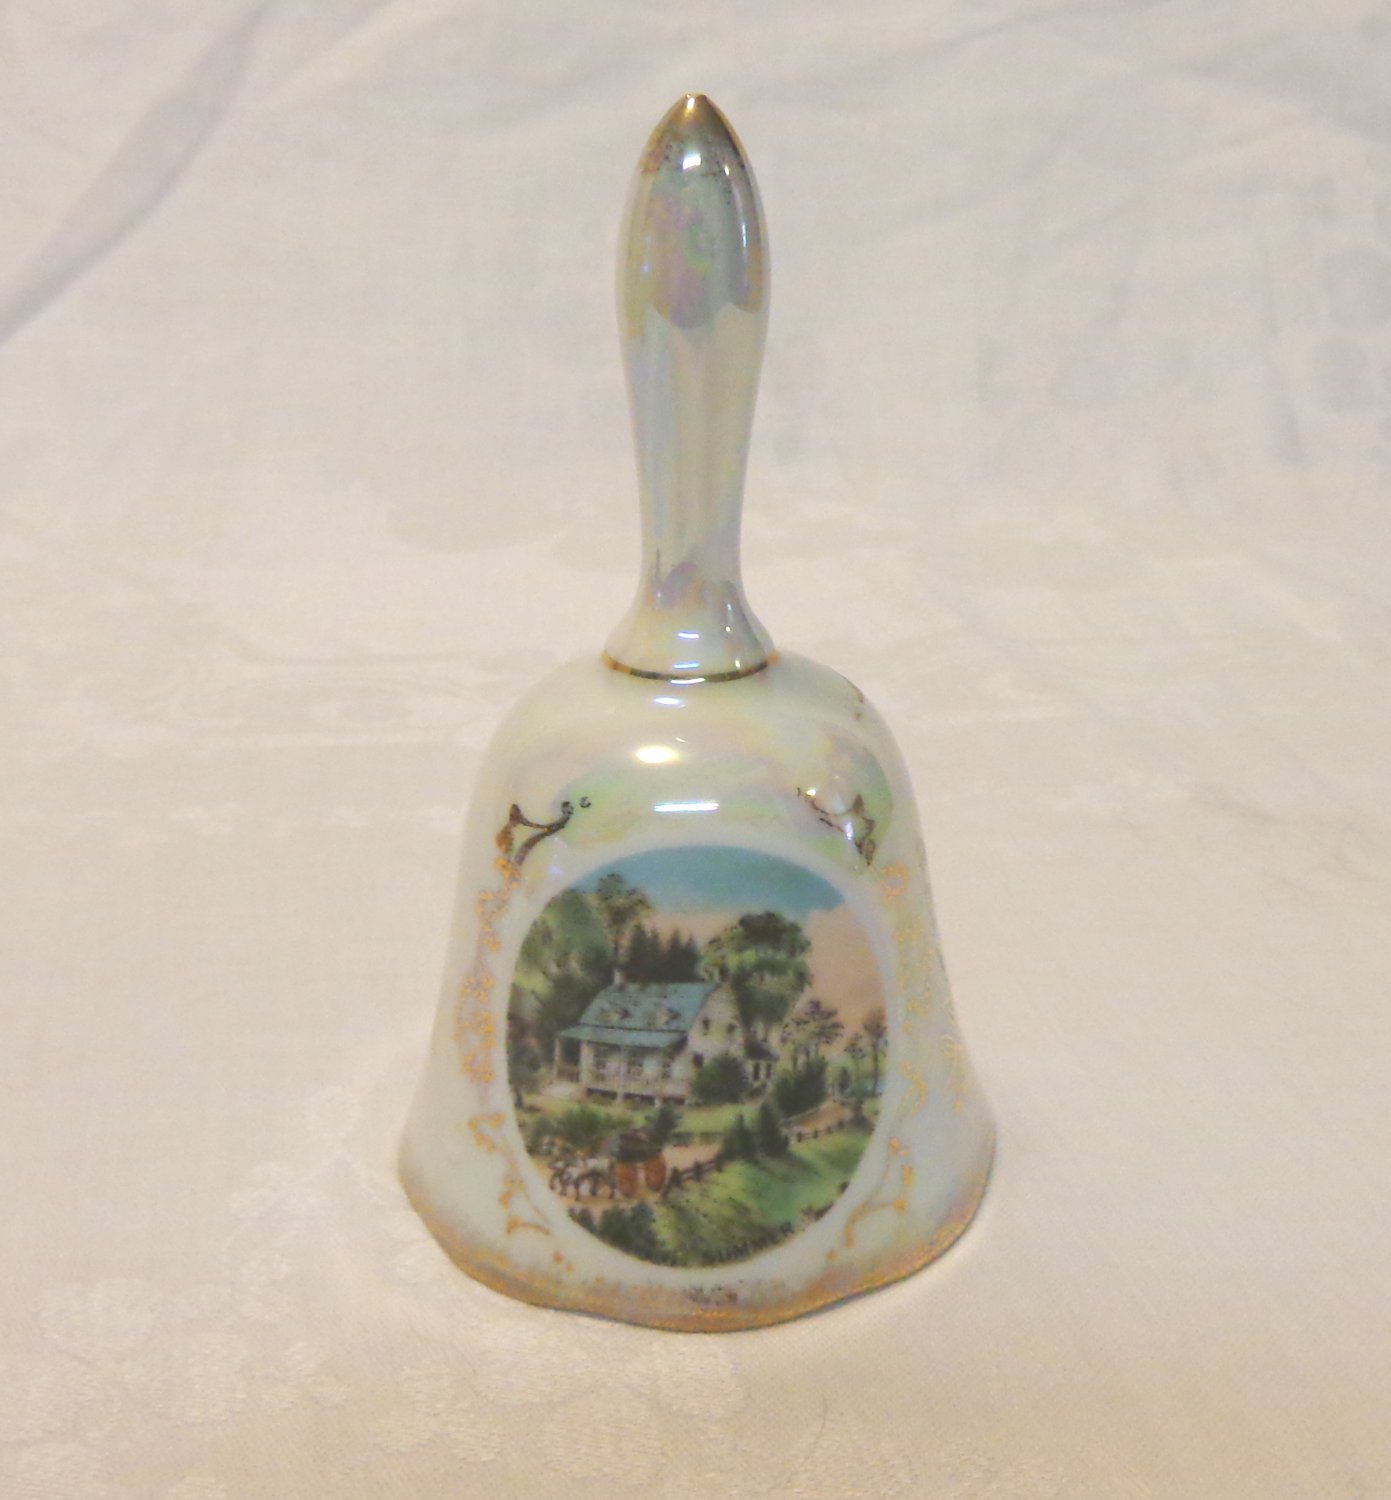 Currier and Ives Summer luster ware bell china lustre ware vintage made in Japan hc3408